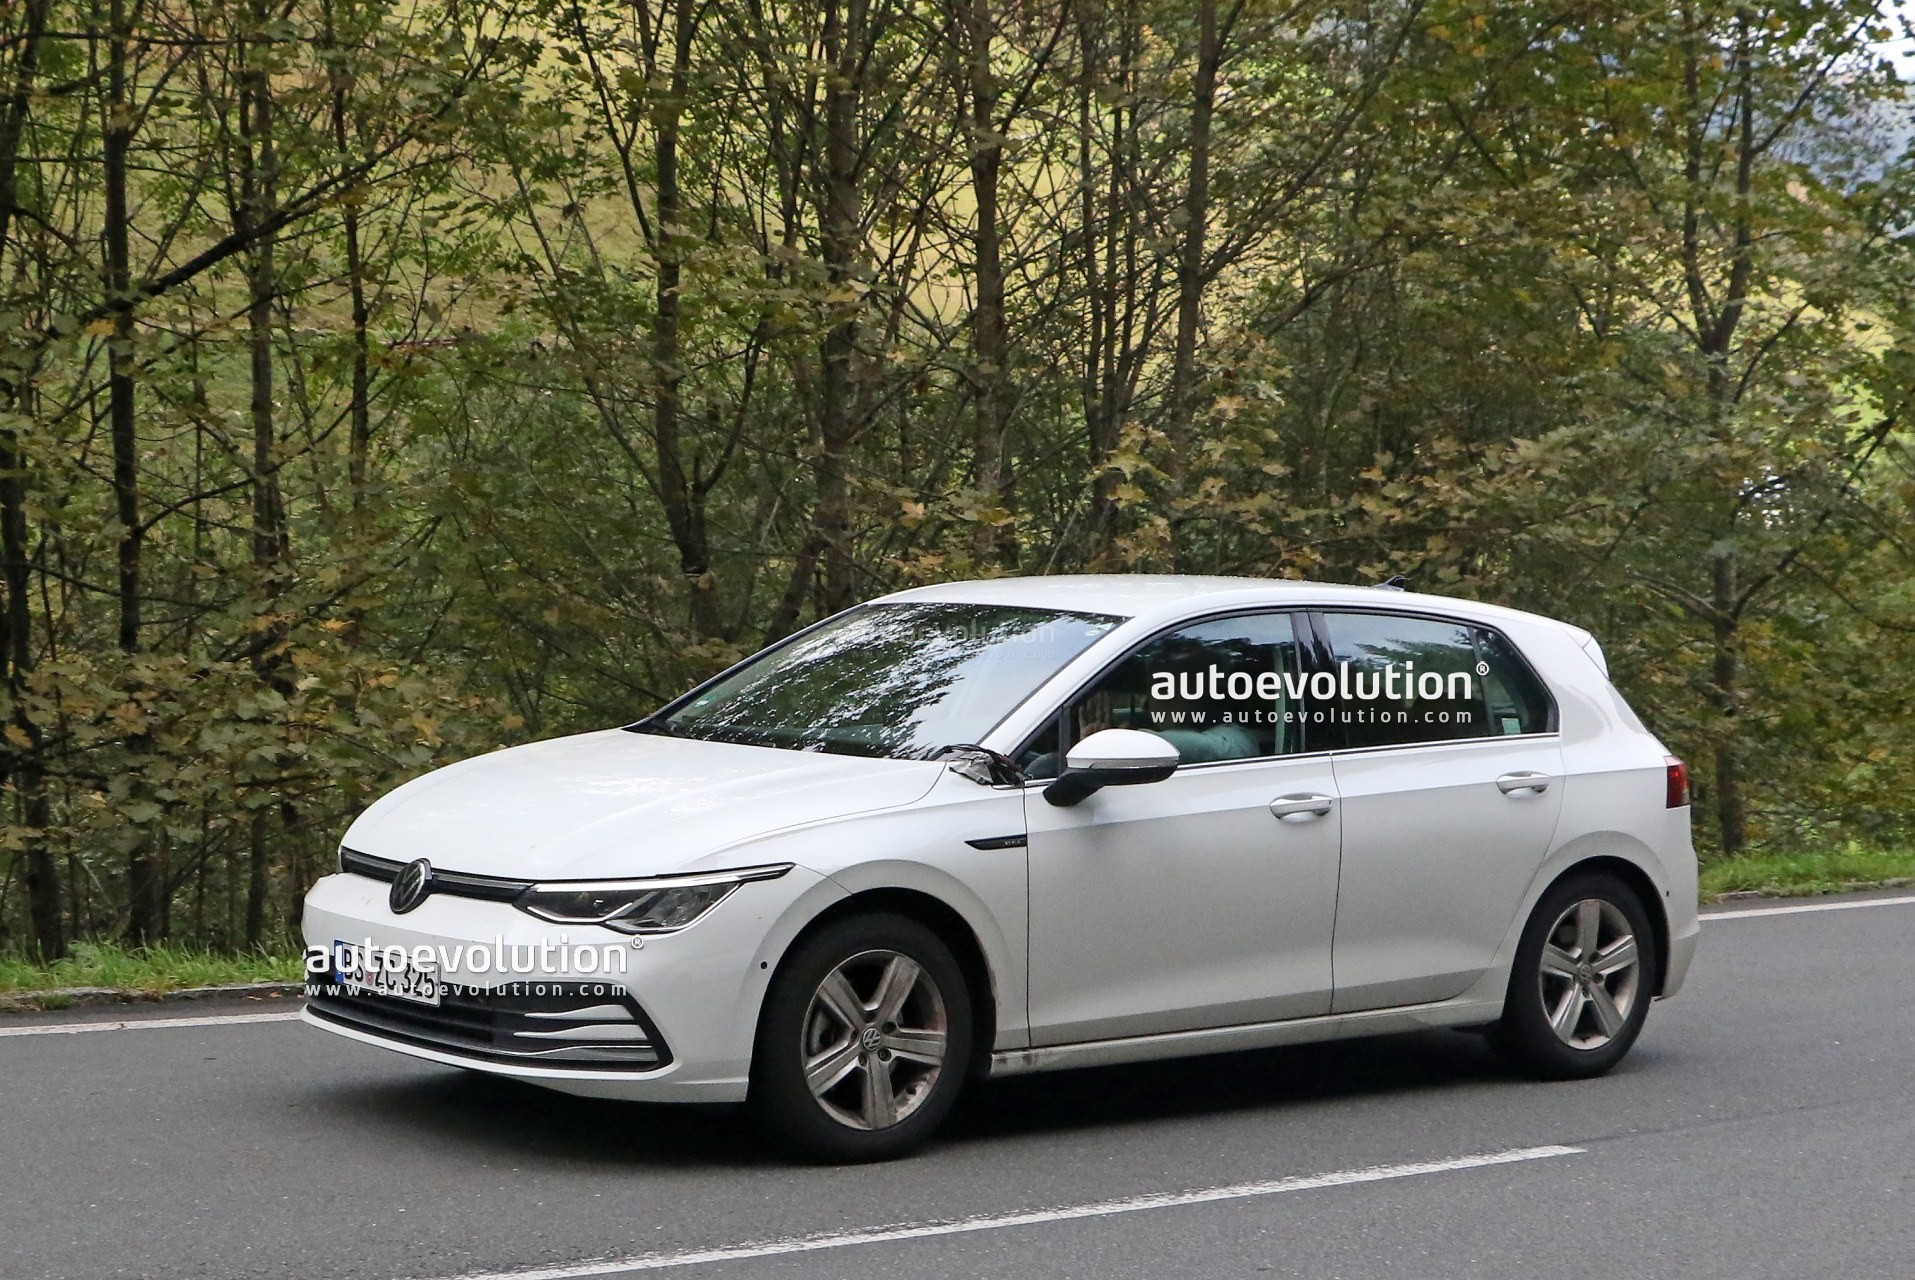 2024 Volkswagen Golf 8 Facelift Spied For The First Time Has A Massive Screen 7 